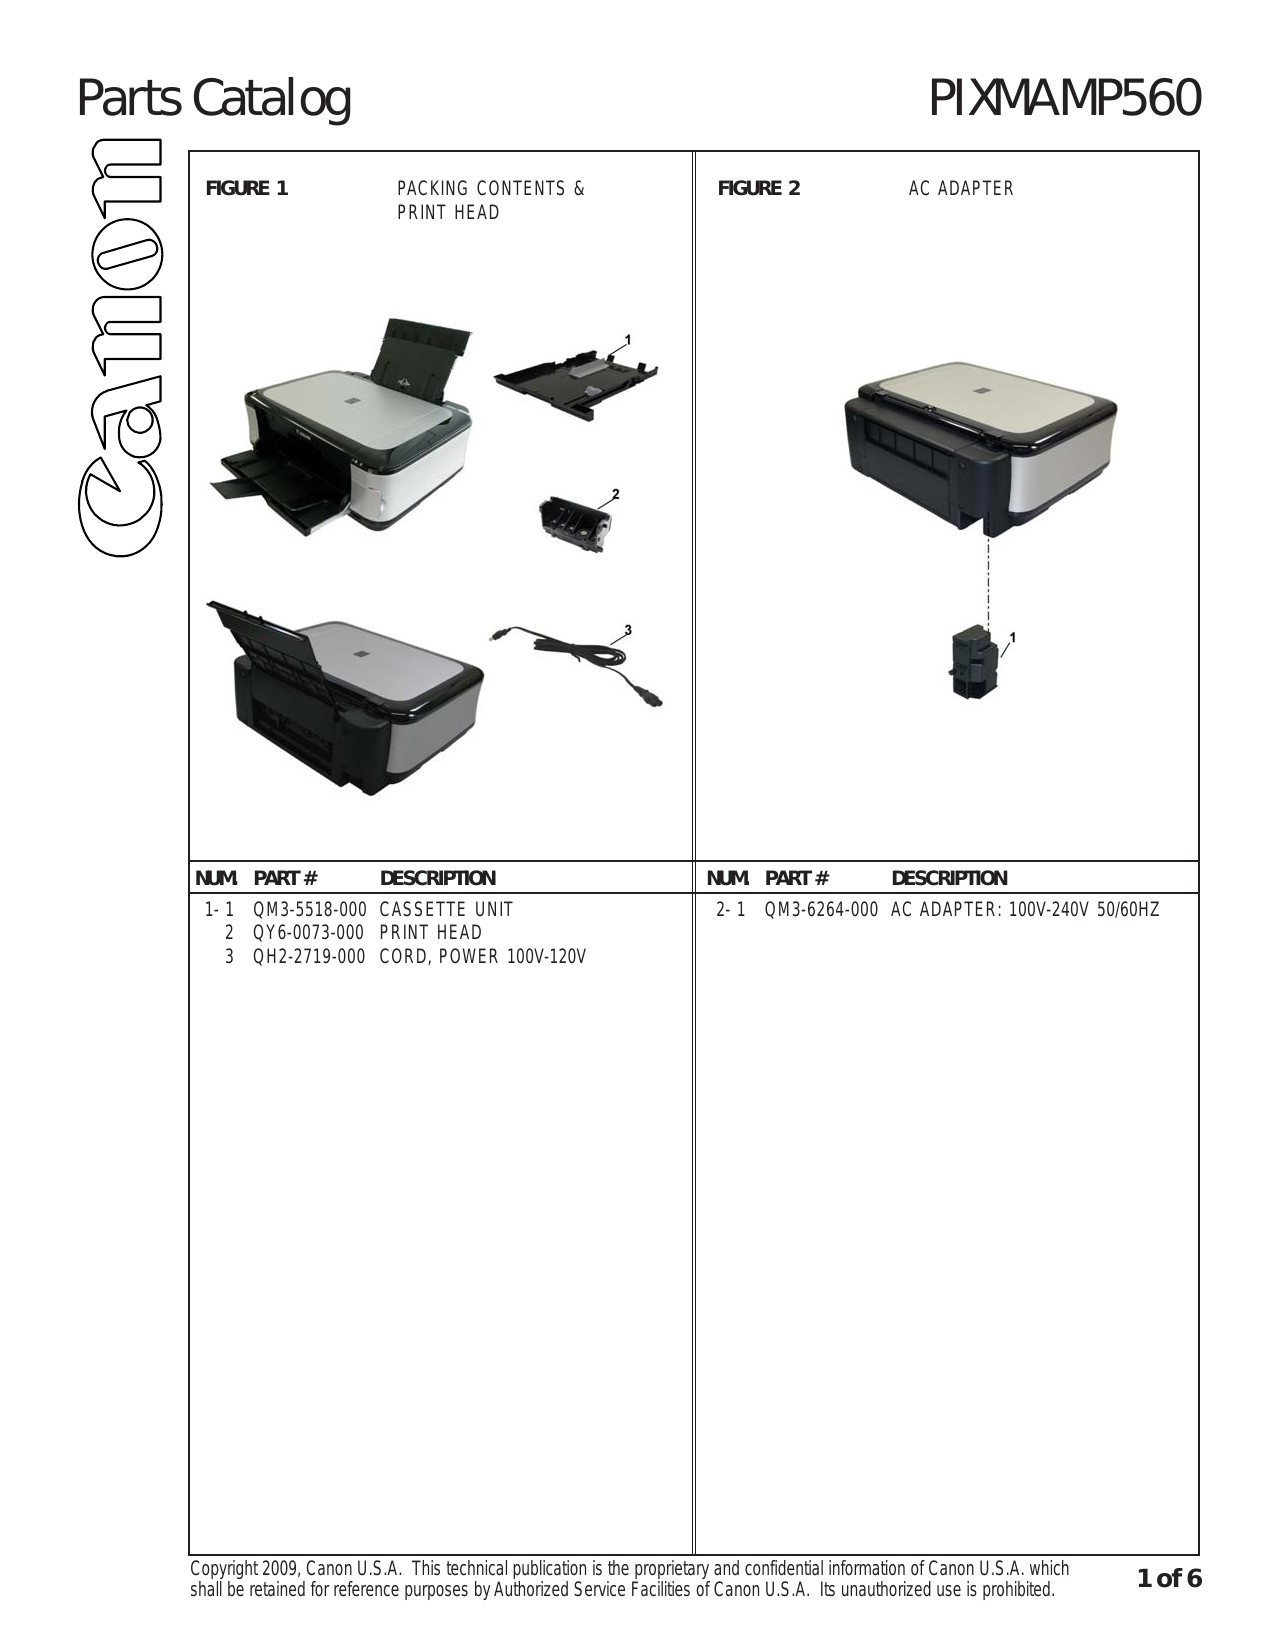 Canon Pixma MP560 all-in-one inkjet printer parts catalog Preview image 2